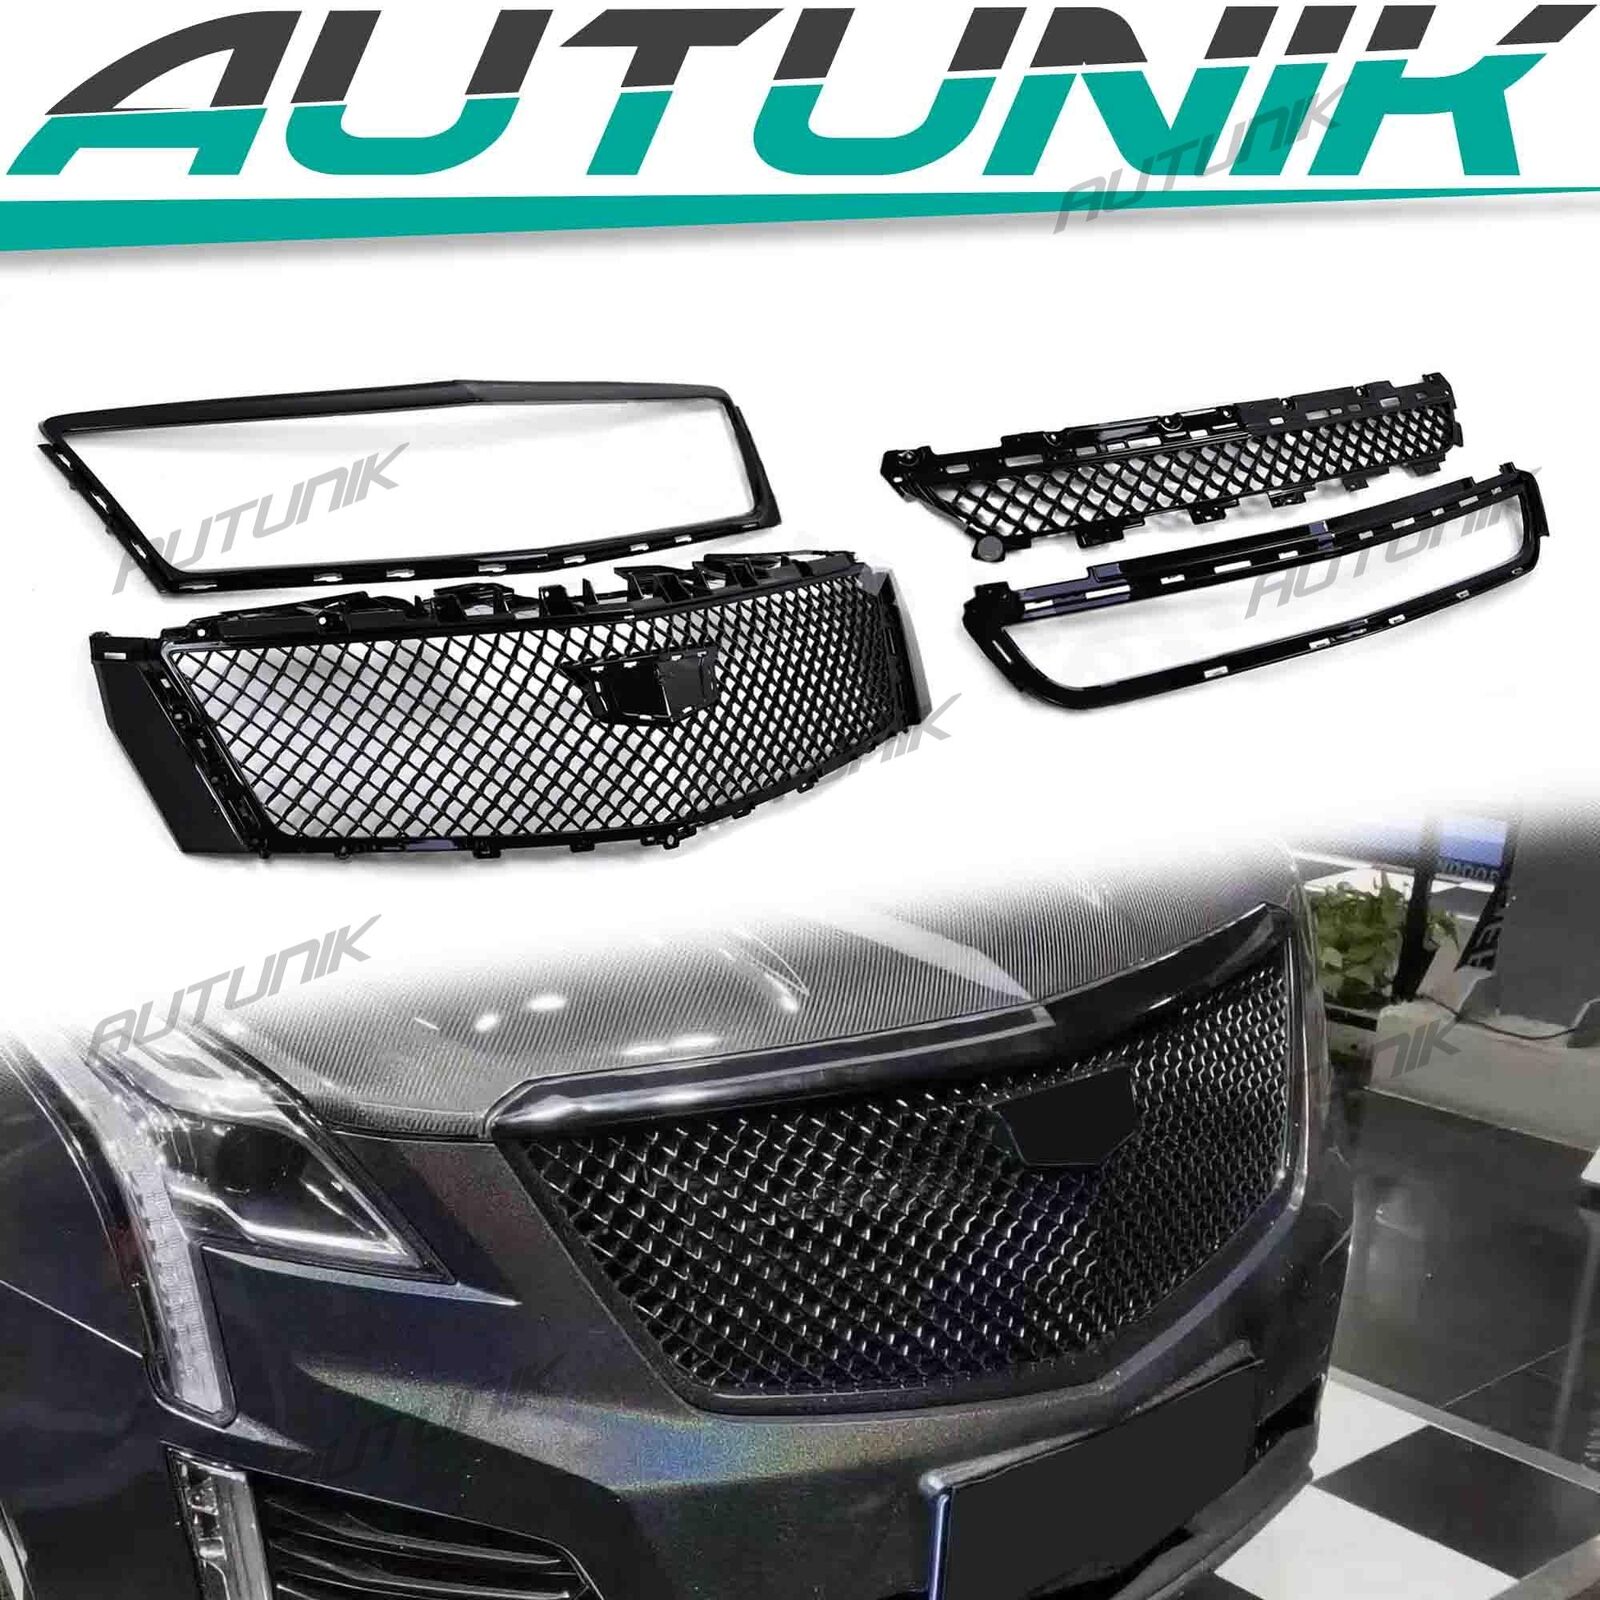 For 2013-2017 XTS Cadillac Black Front Mesh Bumper Grilles Upper & Lower Grille